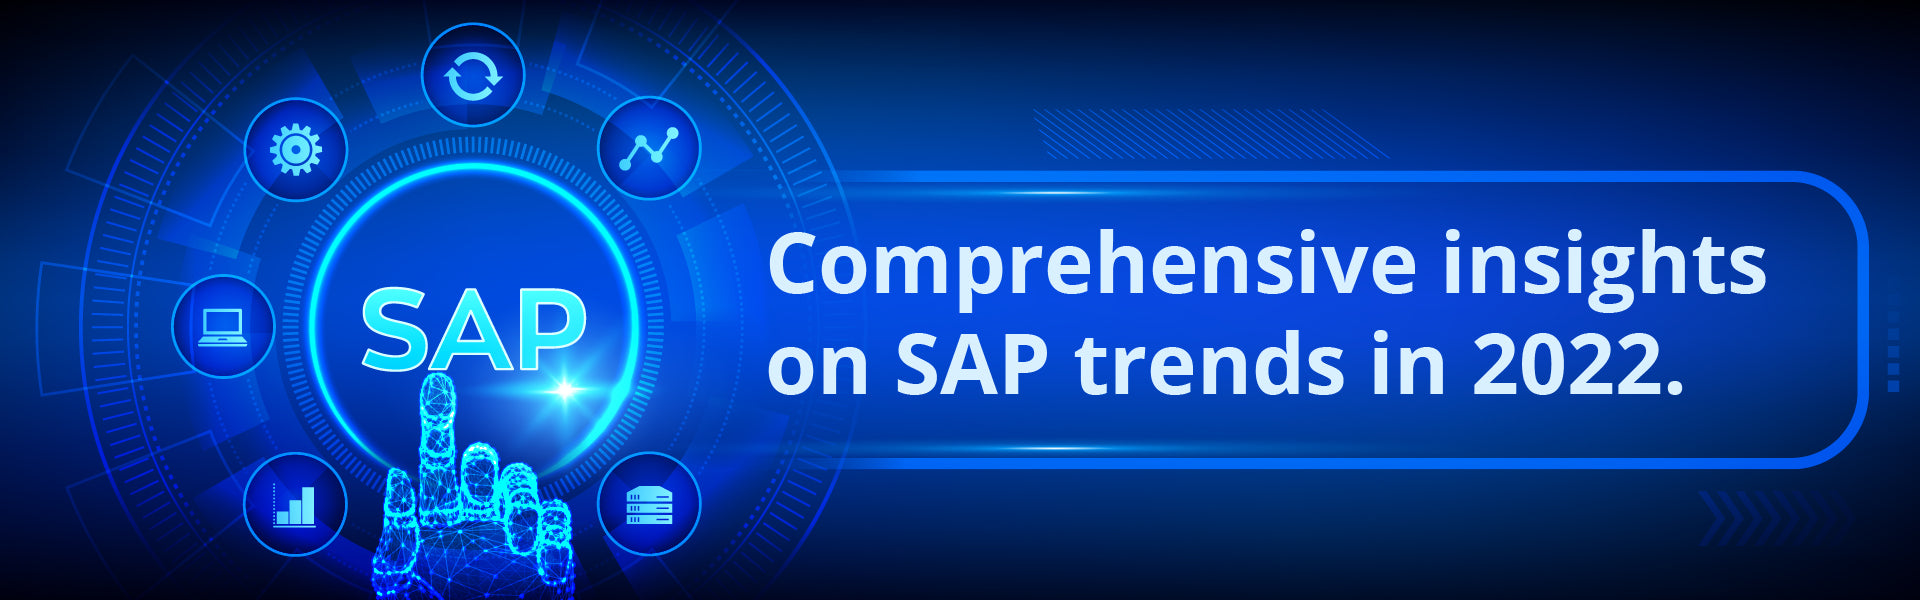 Comprehensive insights on SAP trends in 2022